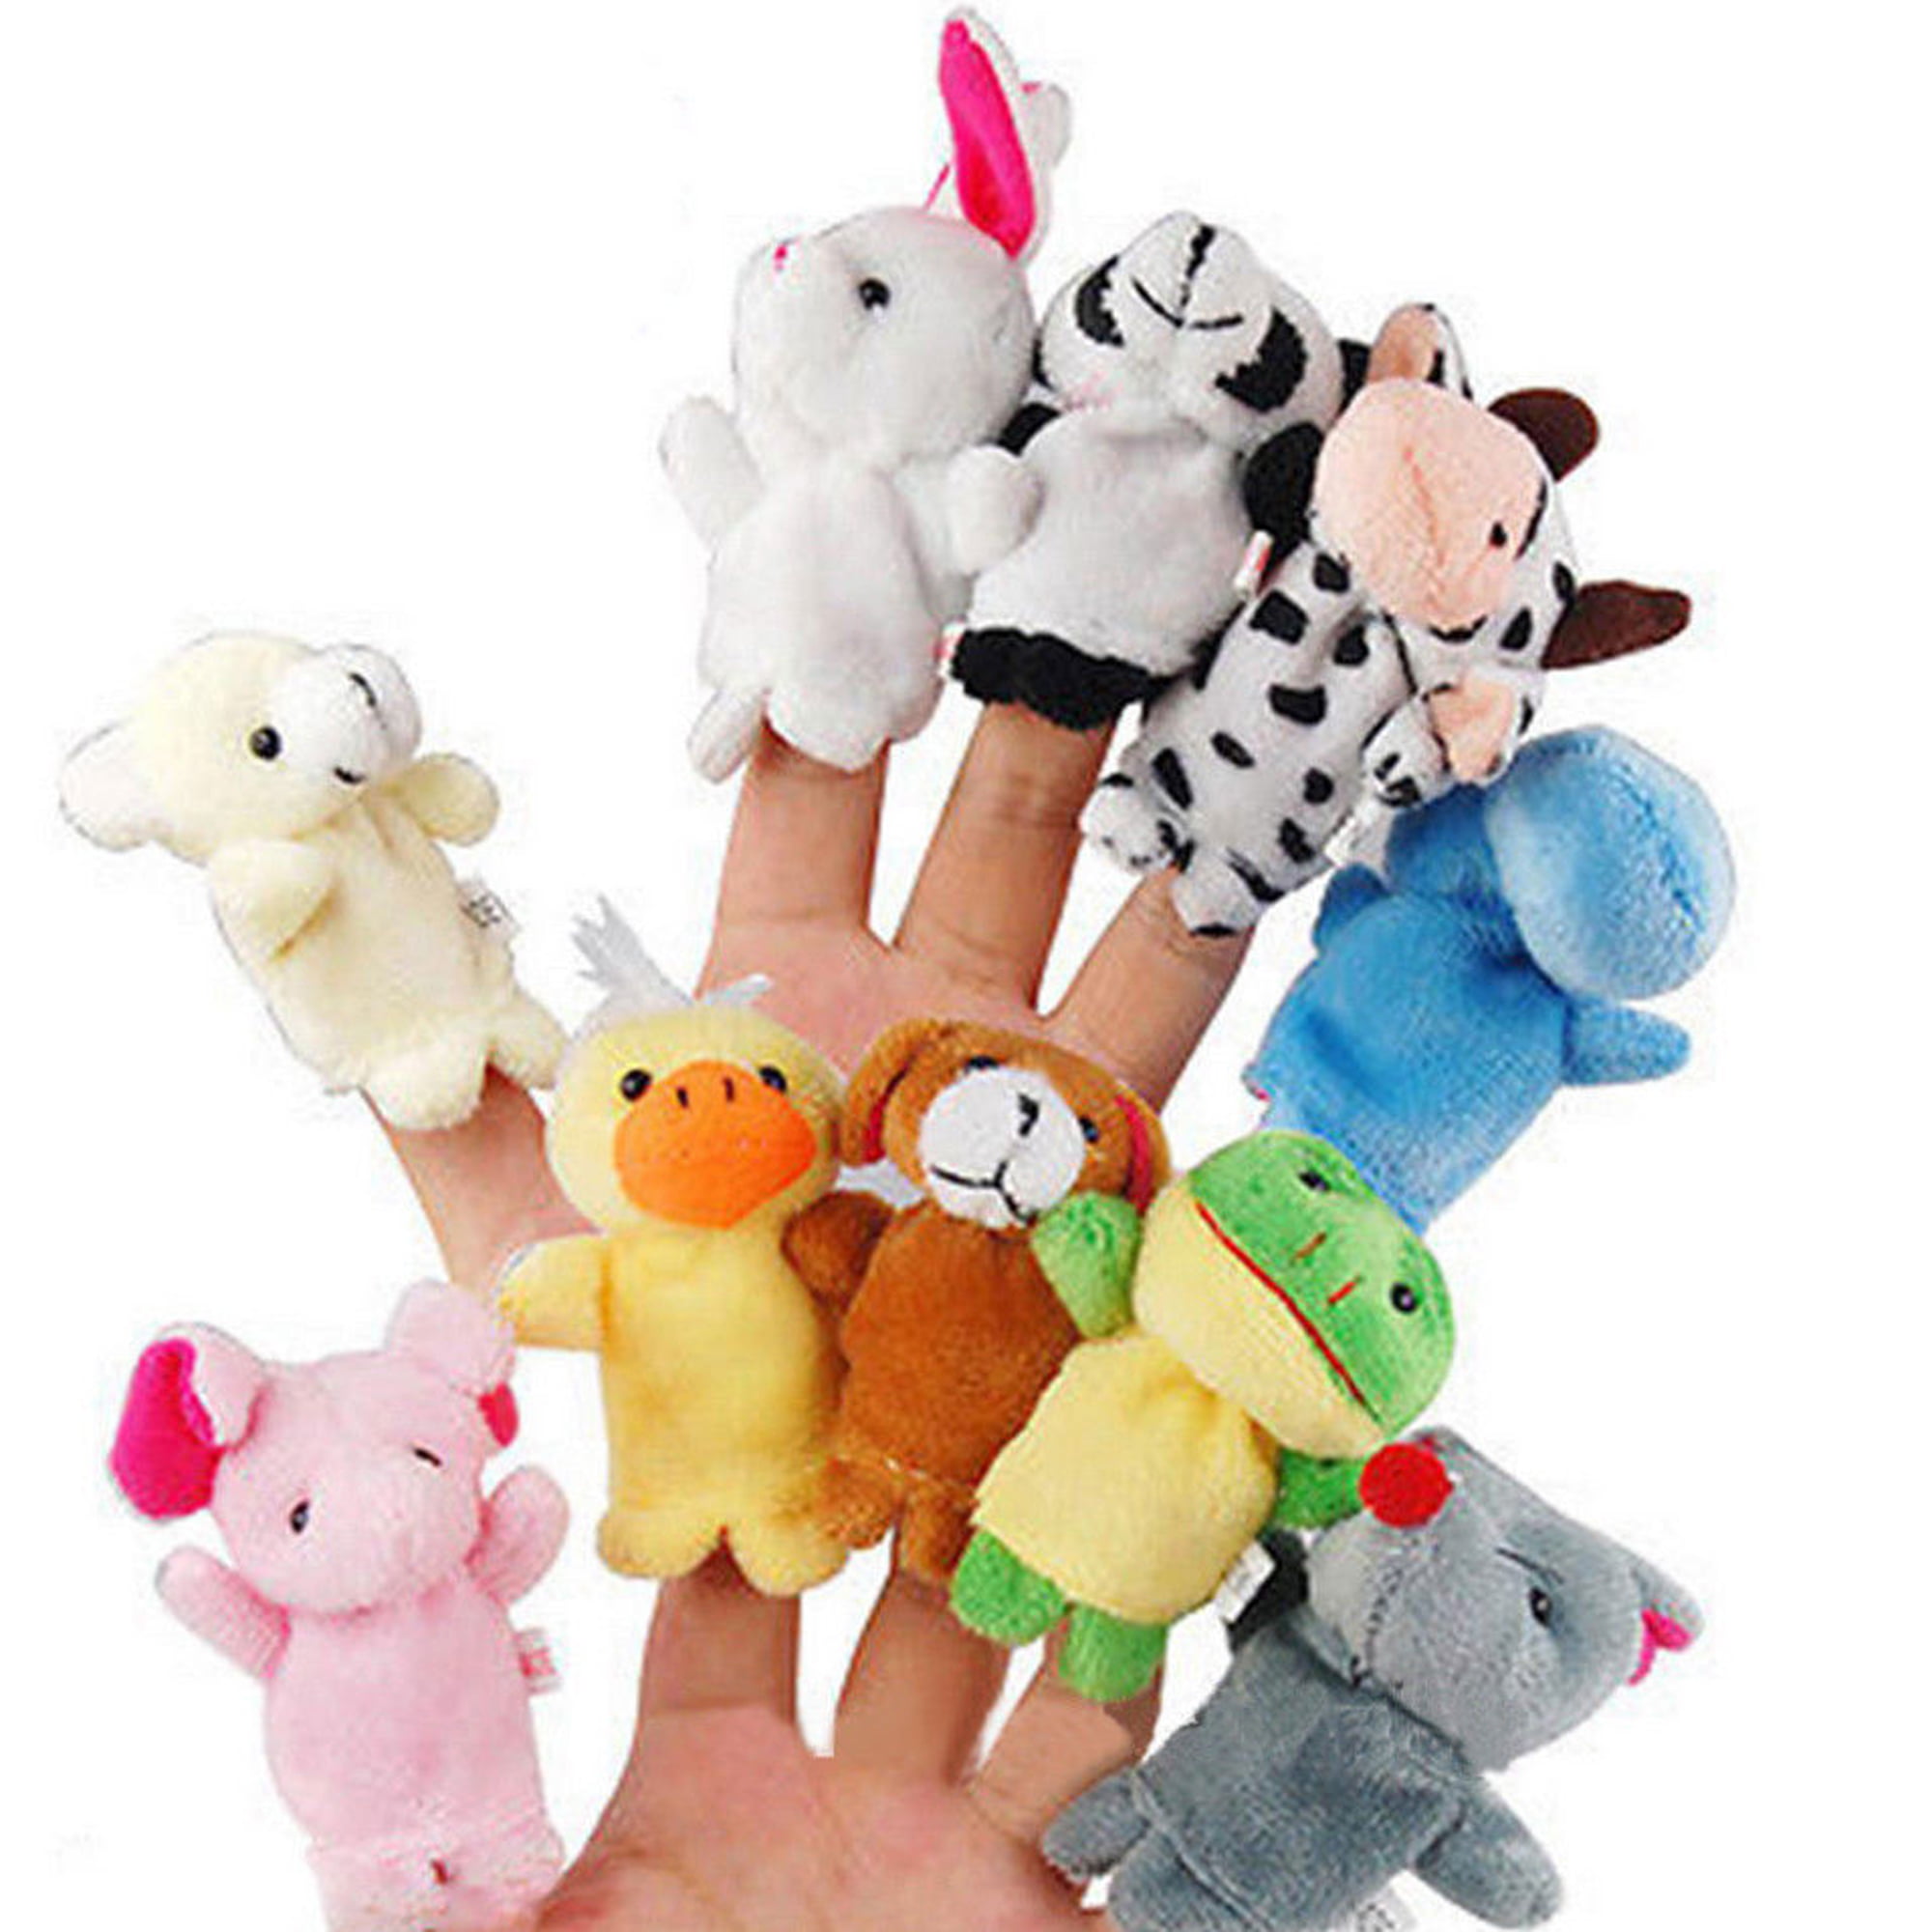 10PCS Animal Finger Puppets Plush Cloth Doll Baby Educational Hand Toy Kids Gift 